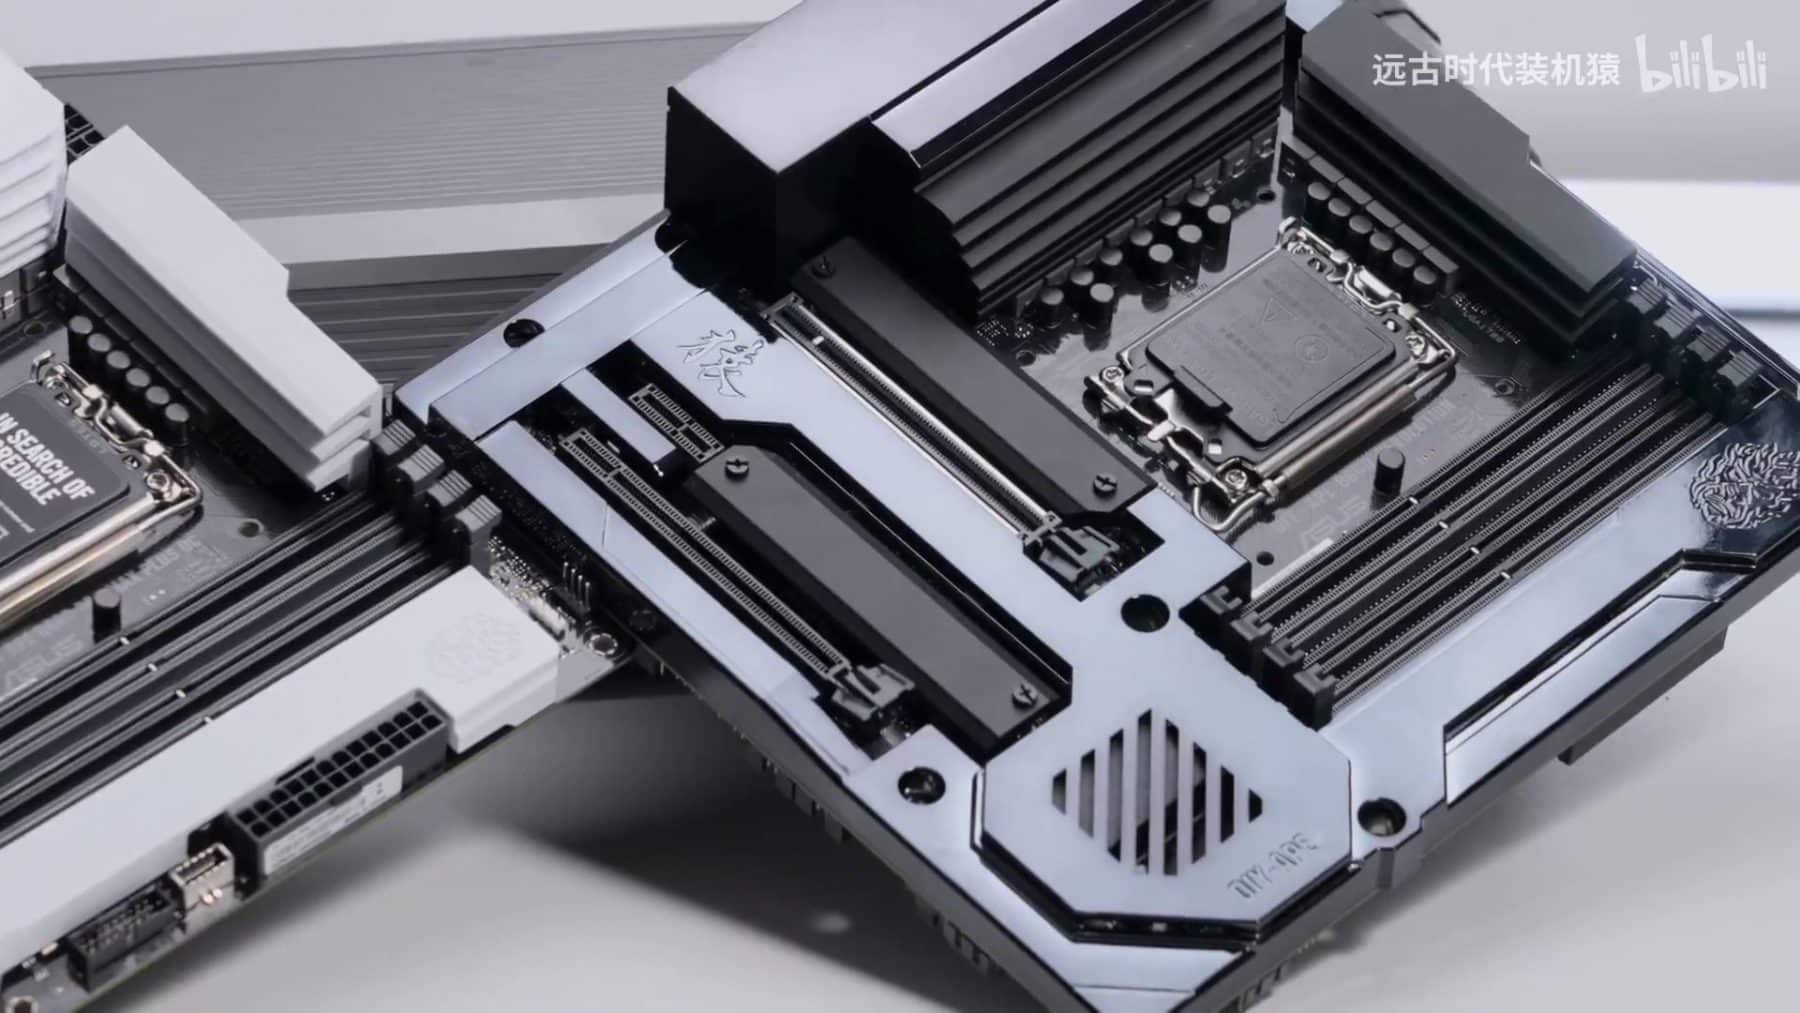 ASUS DIY-APE Revolution Project Will Solve The PC Cable Management Issue